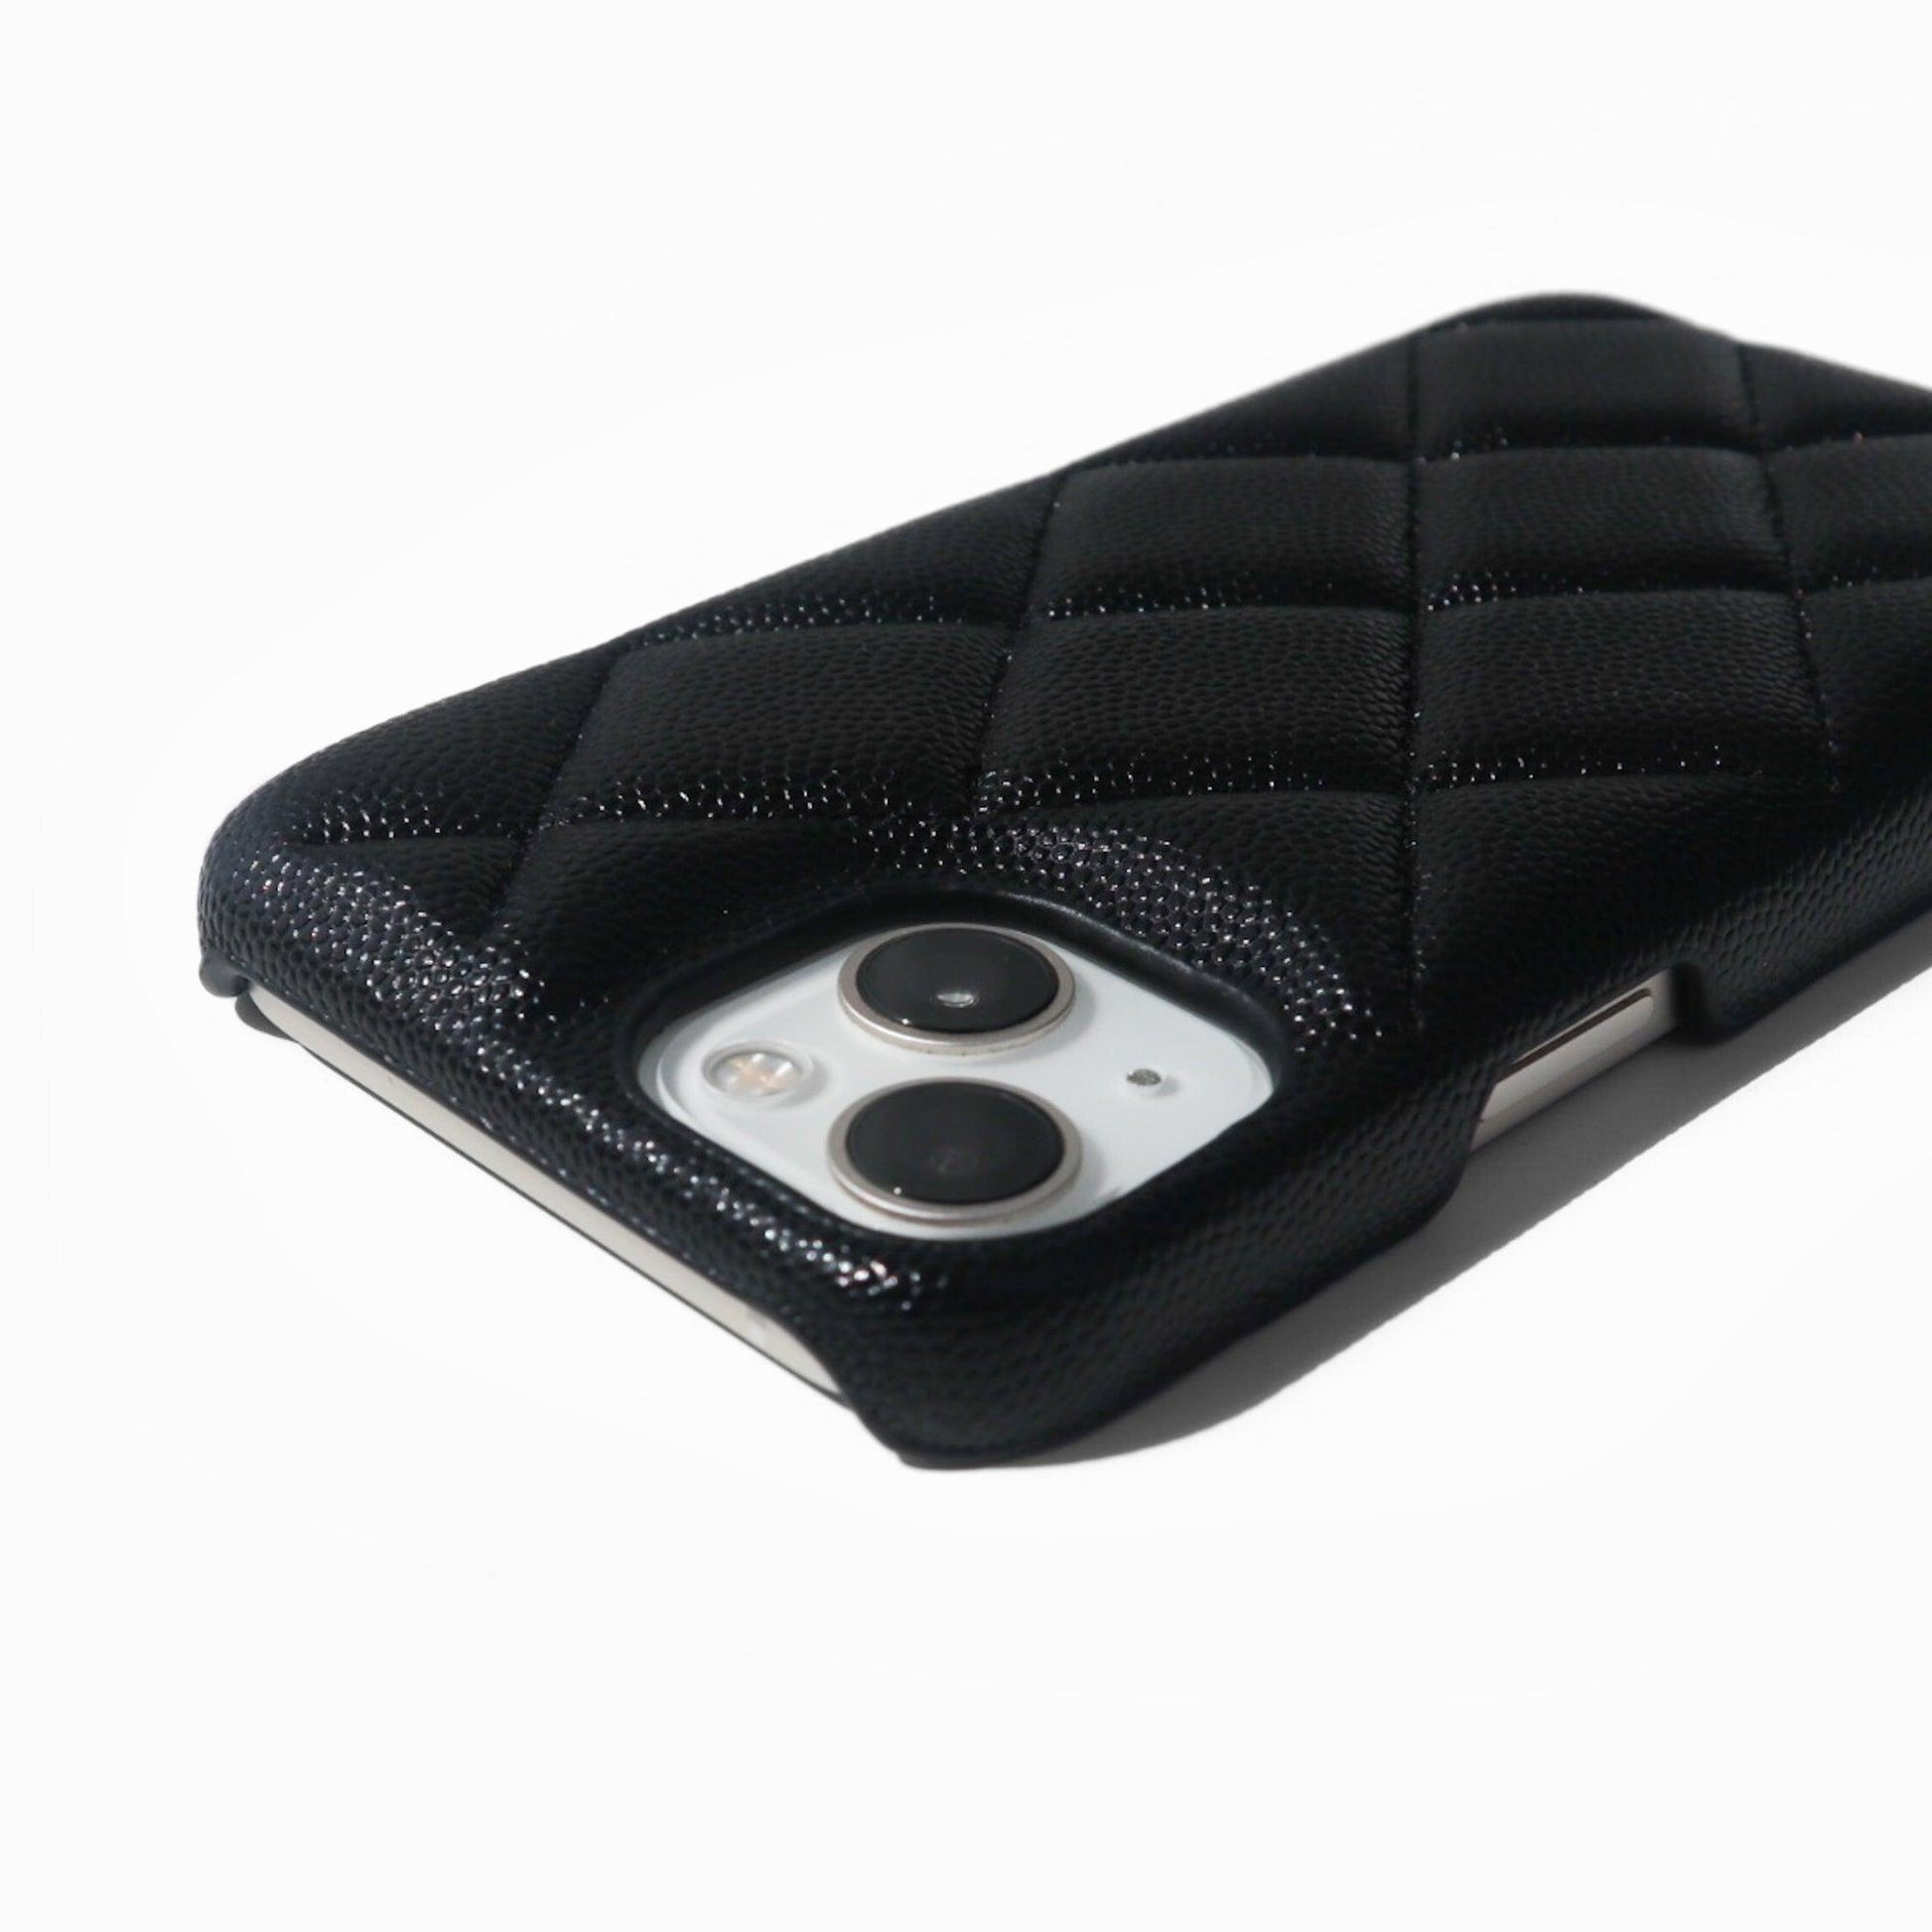 iPhone Quilt Case - Gloss Black